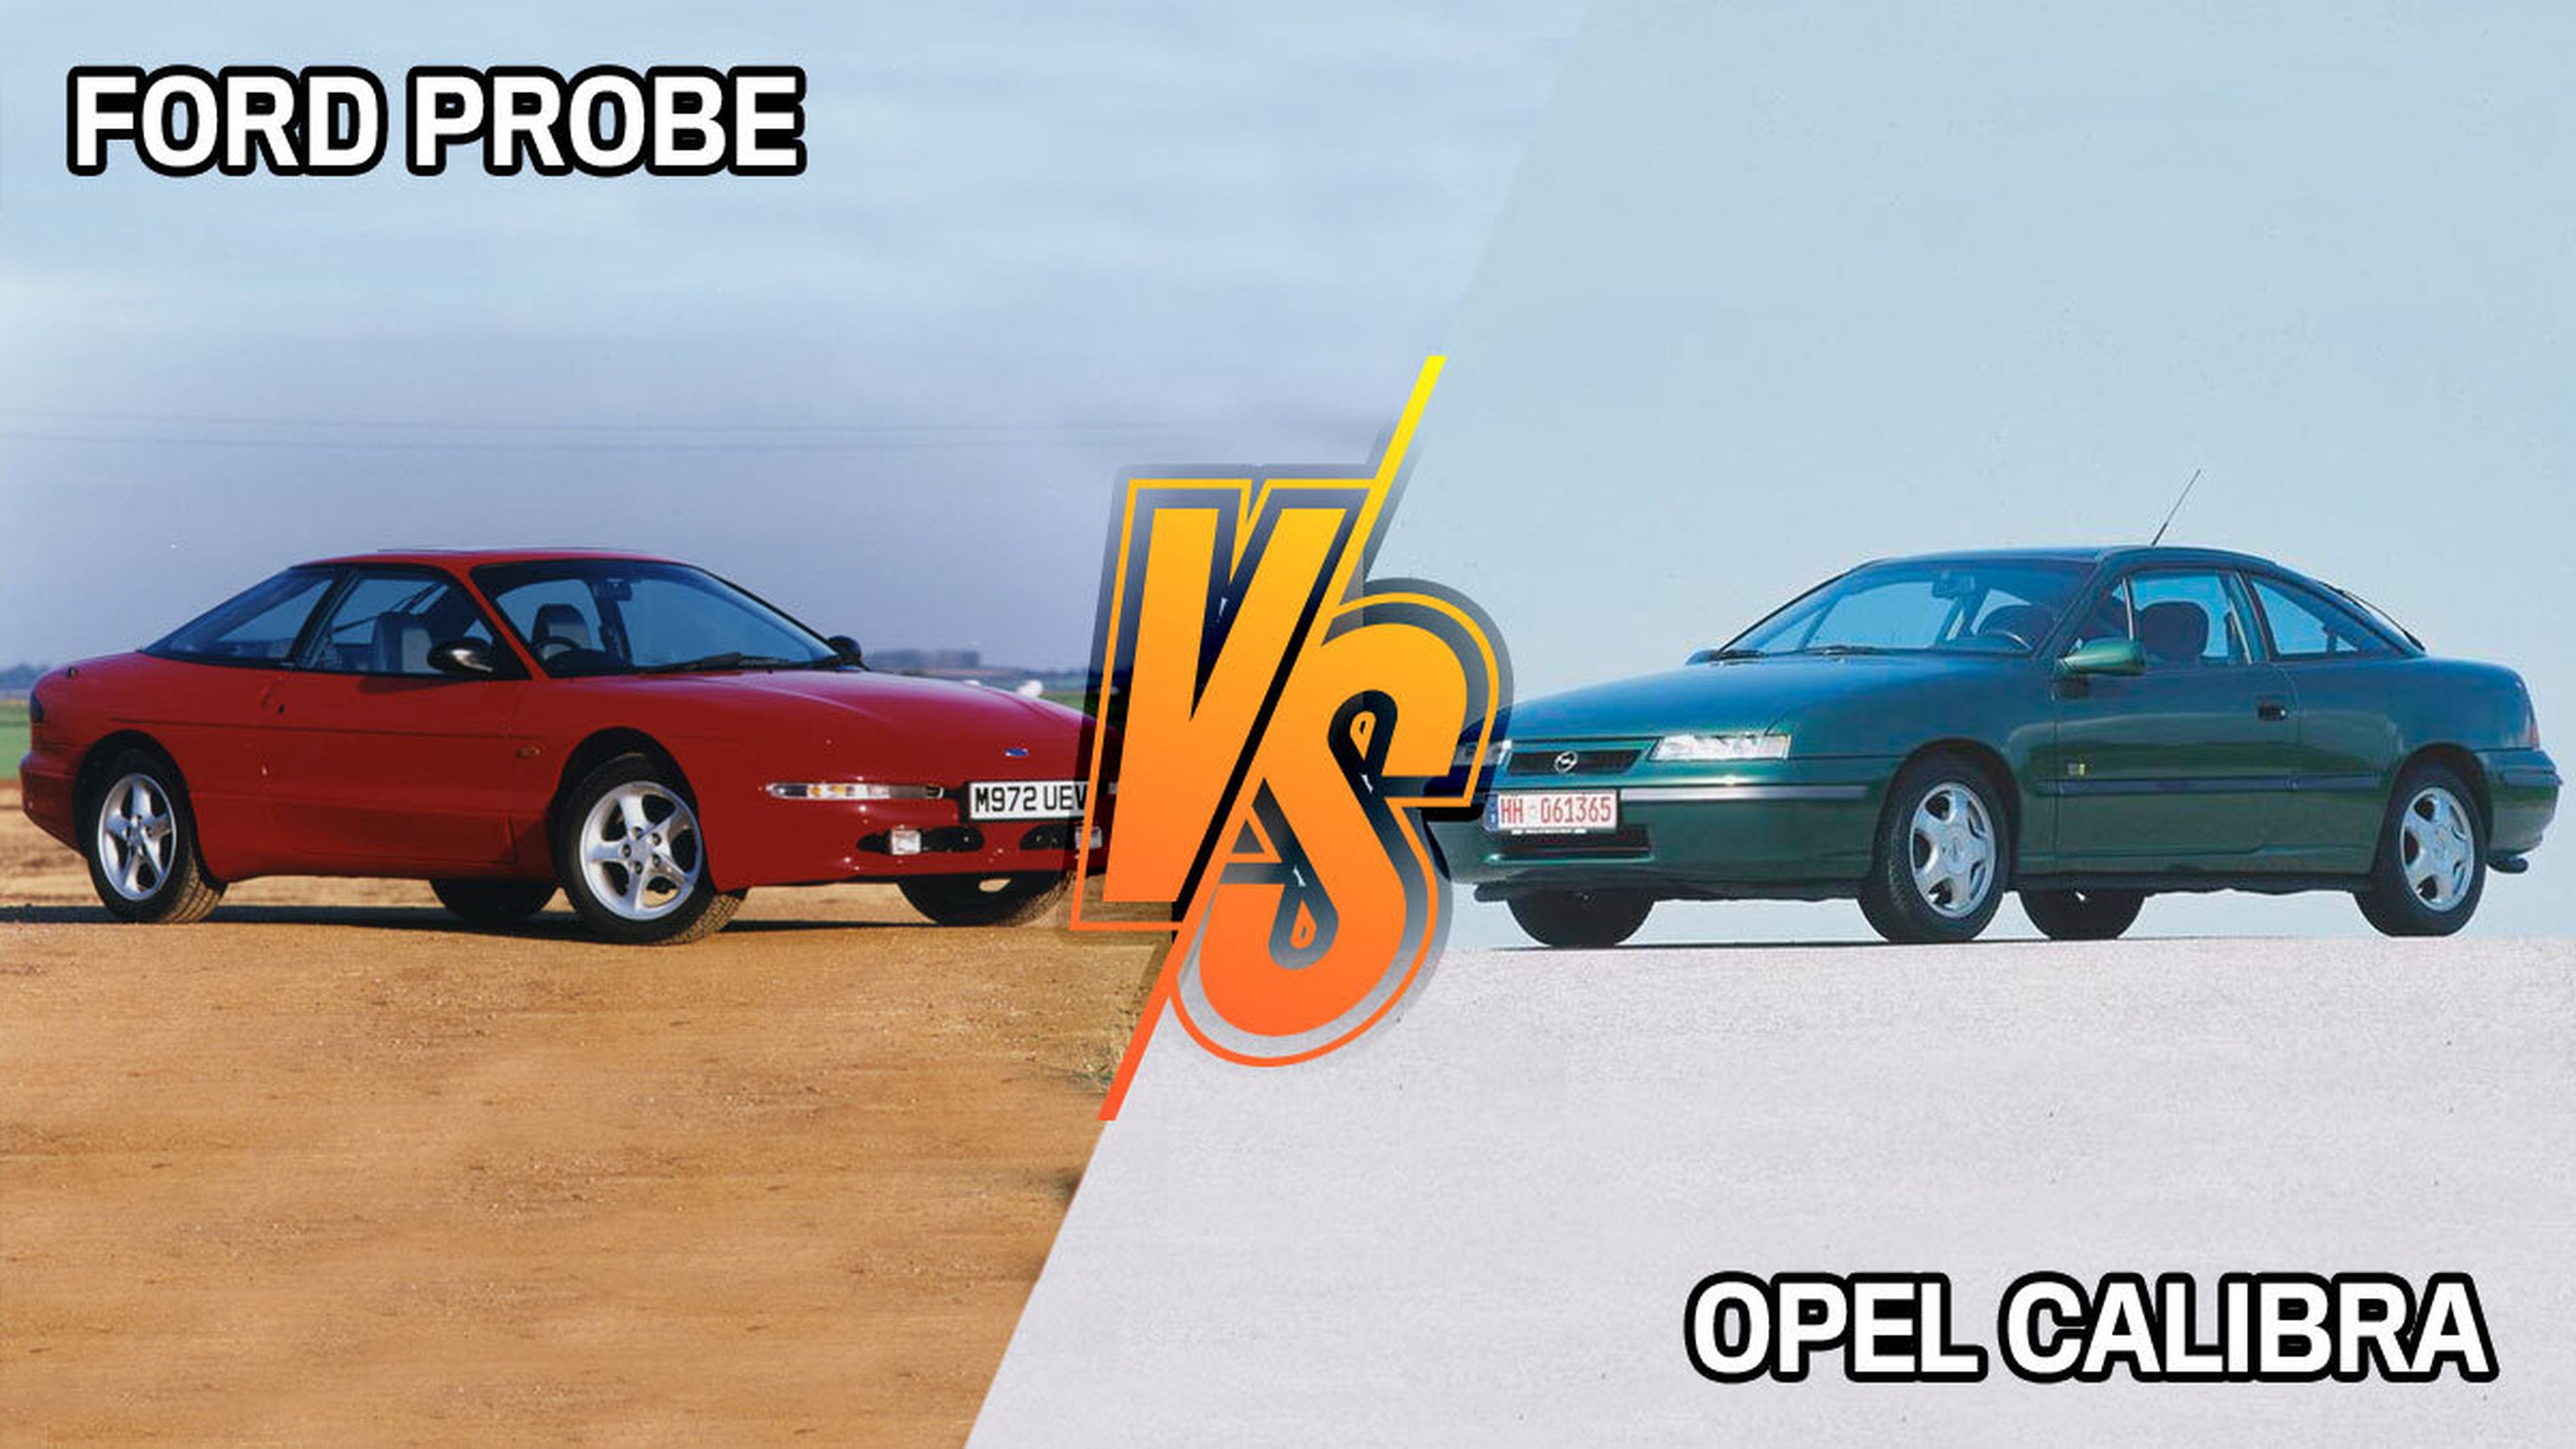 Compa oldie: Opel Calibra contra Ford Probe